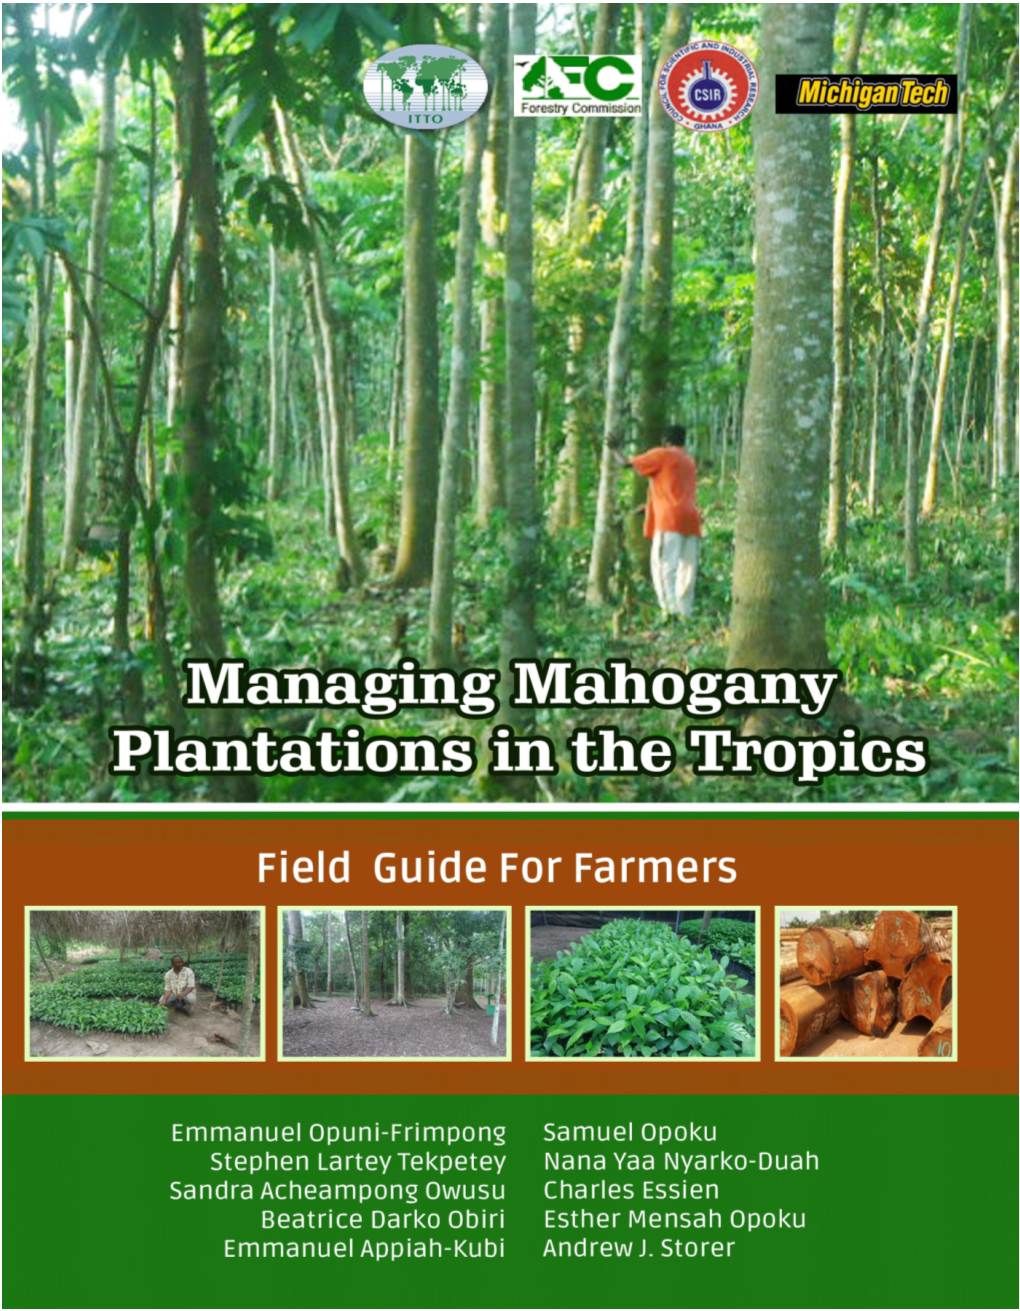 Managing Mahogany Plantations in the Tropics: Field Guide for Farmers